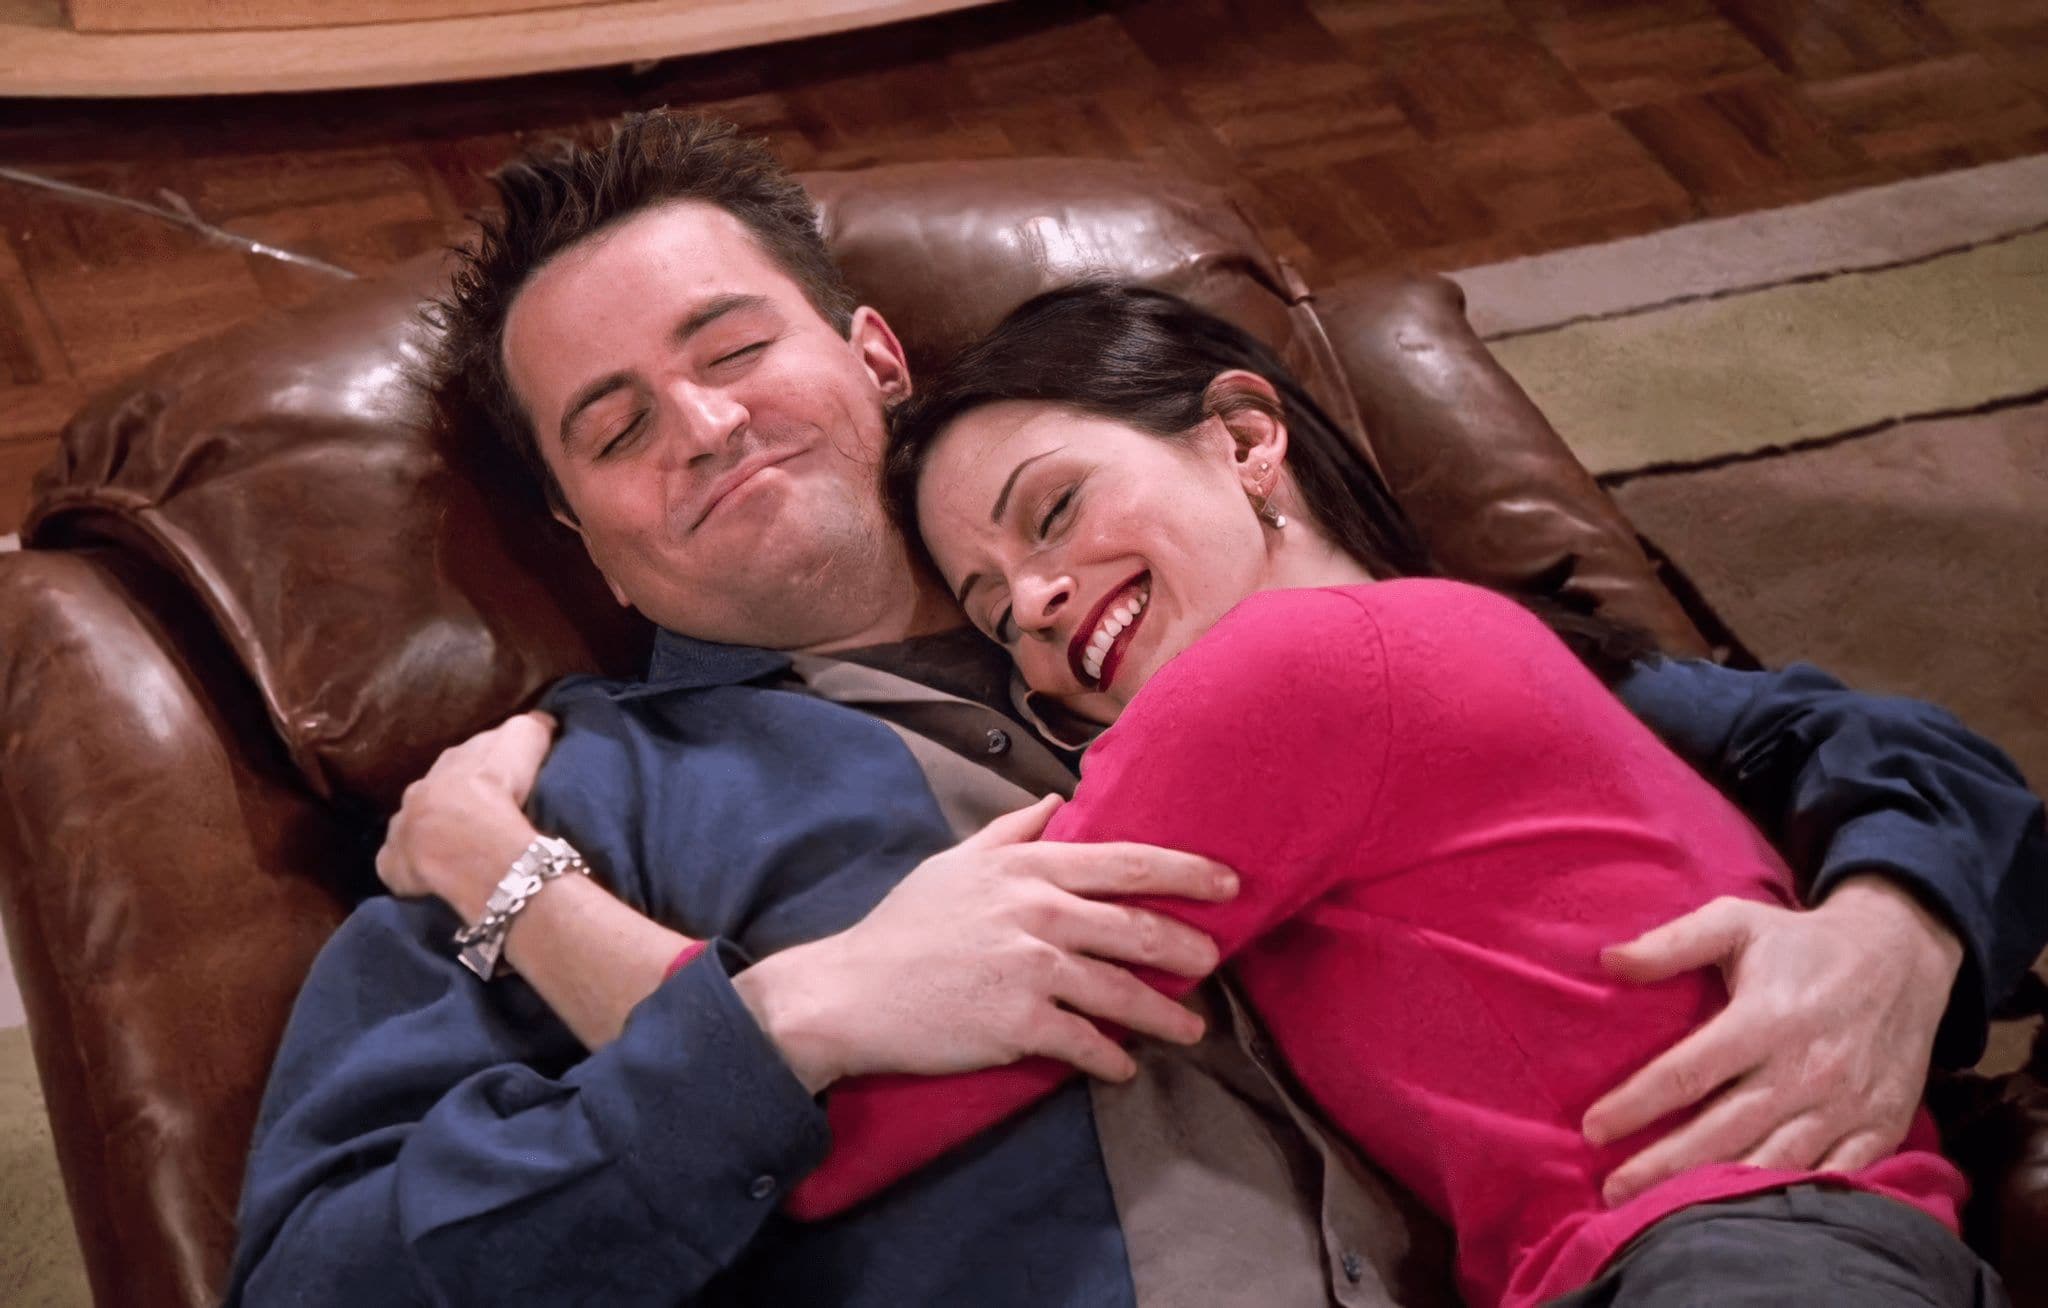 5 Life Lessons We Can All Learn from Chandler Bing